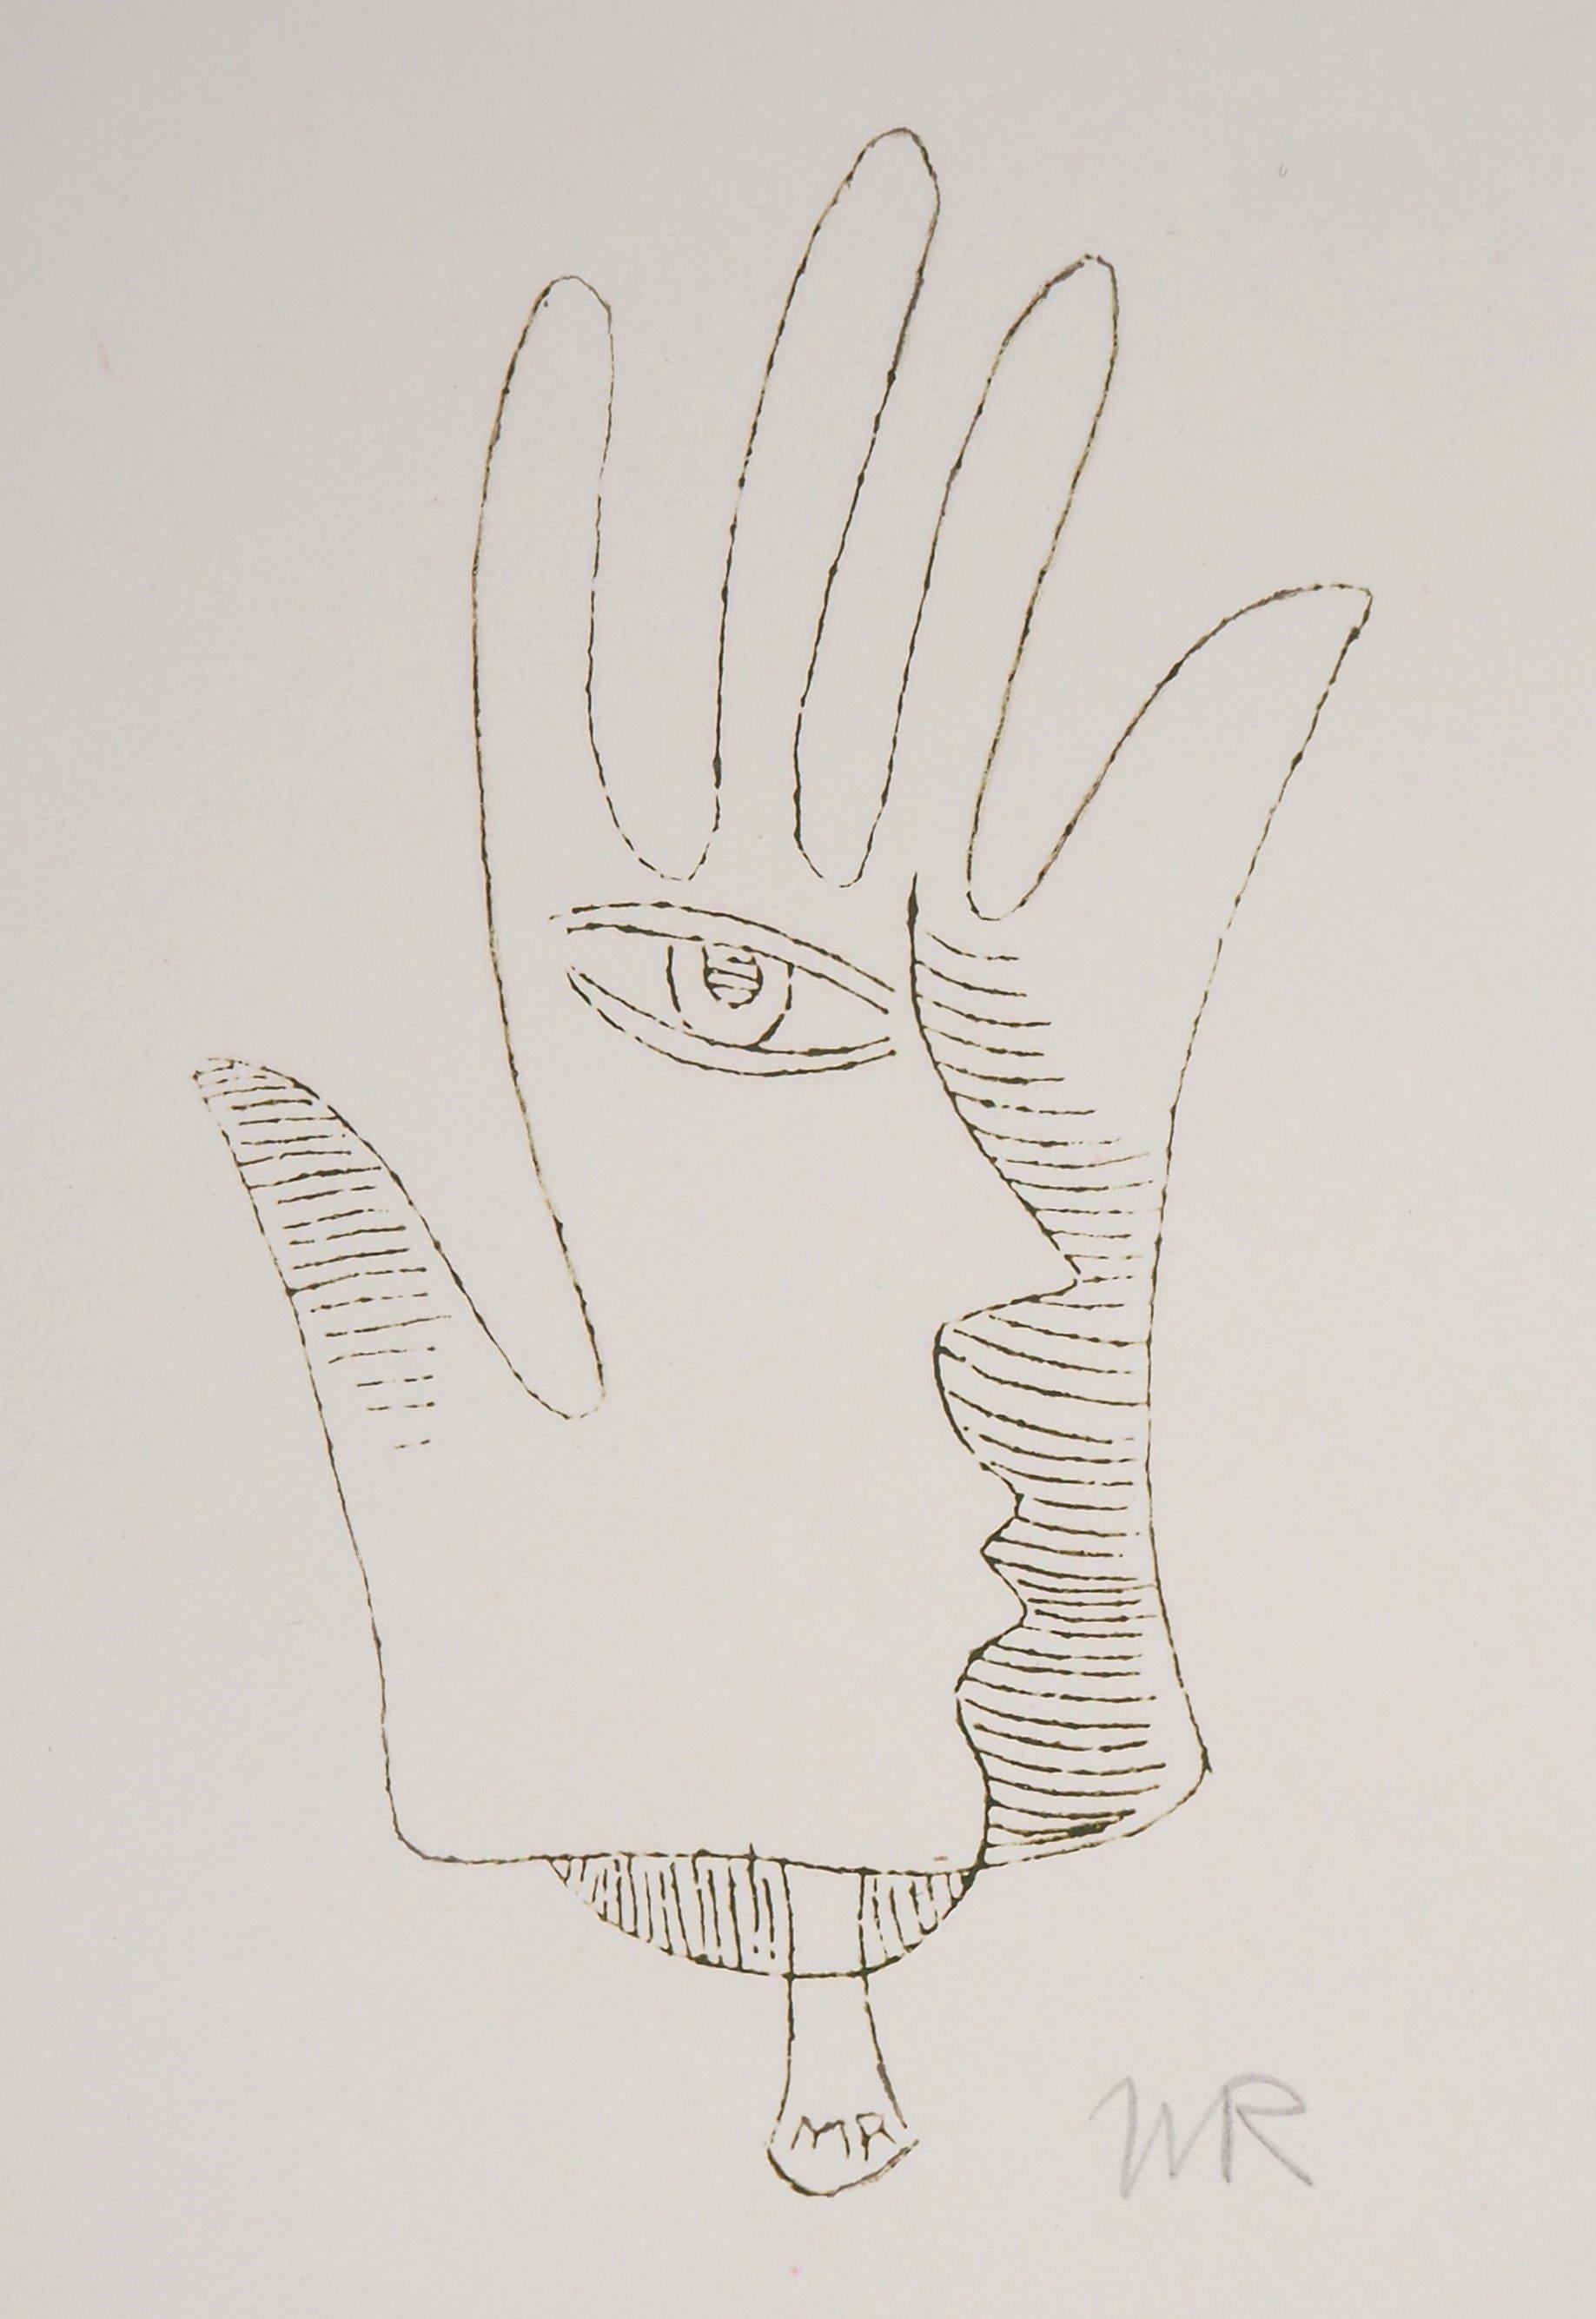 Man Ray Abstract Print - Surrealist Hand, 1969 - Original Handsigned Etching